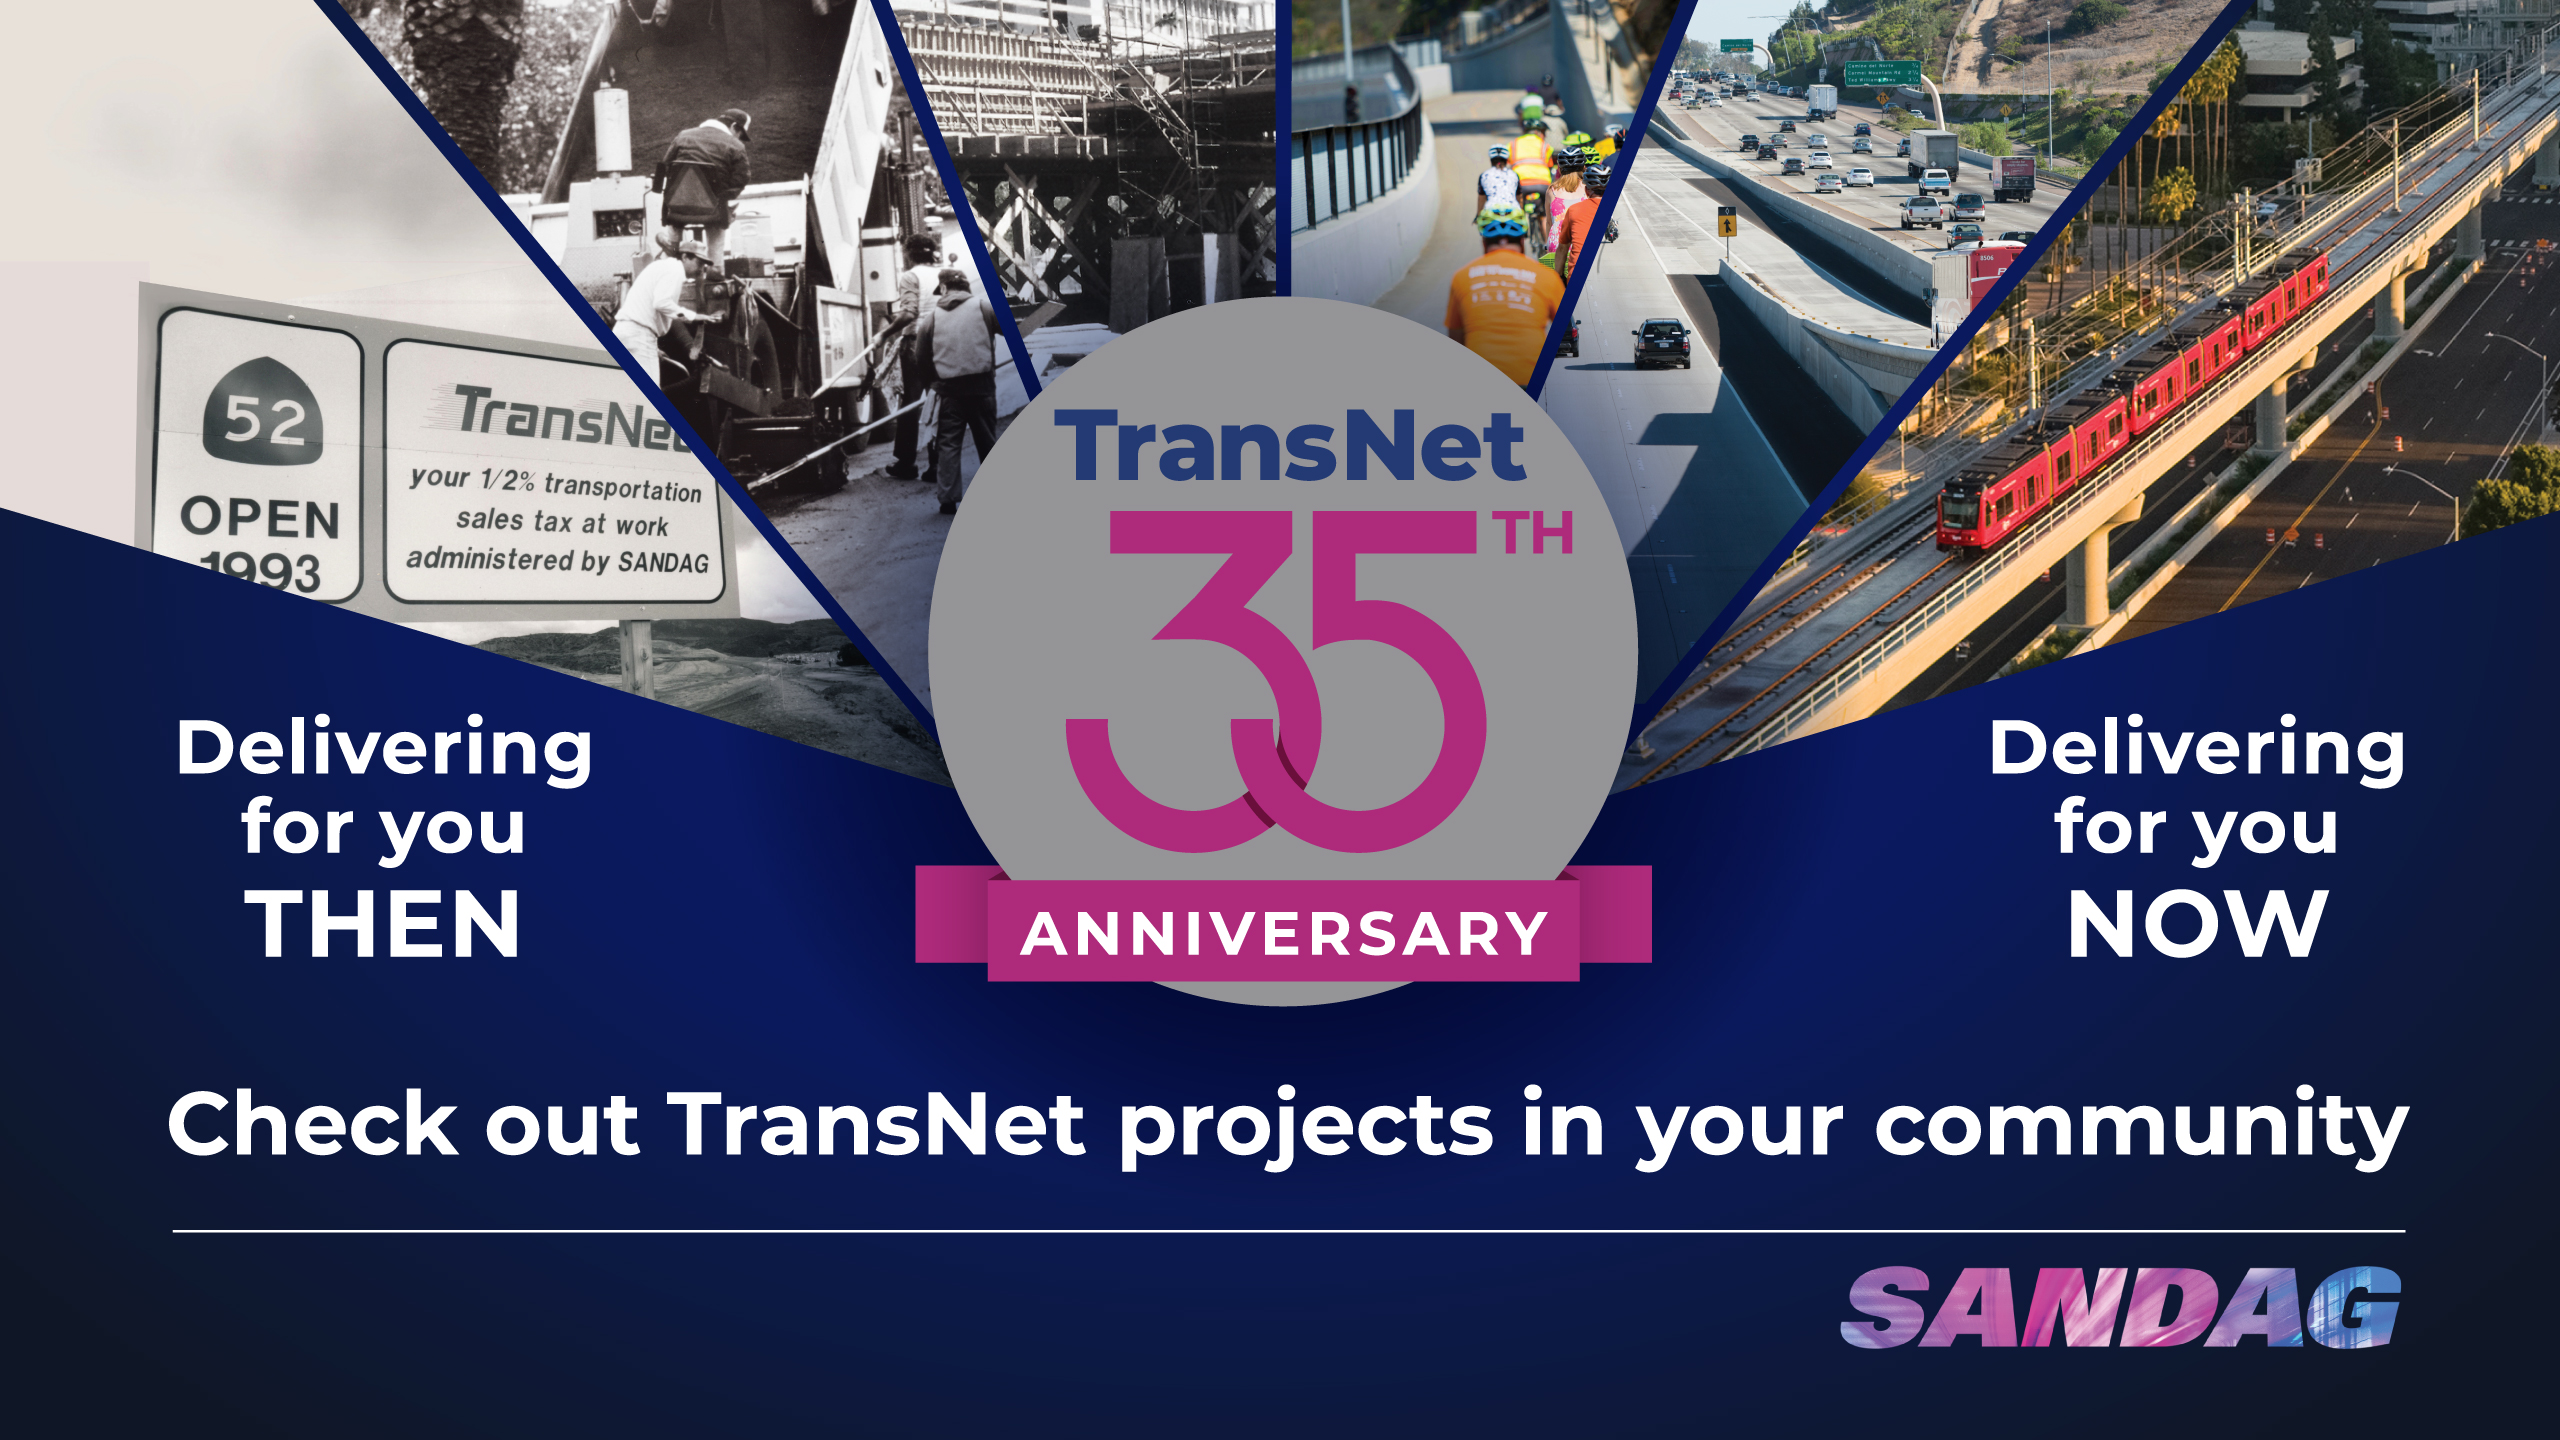 A video montage of various SANDAG TransNet projects, including road construction, people using the Trolley, wildlife and landscapes, and people riding bikes.